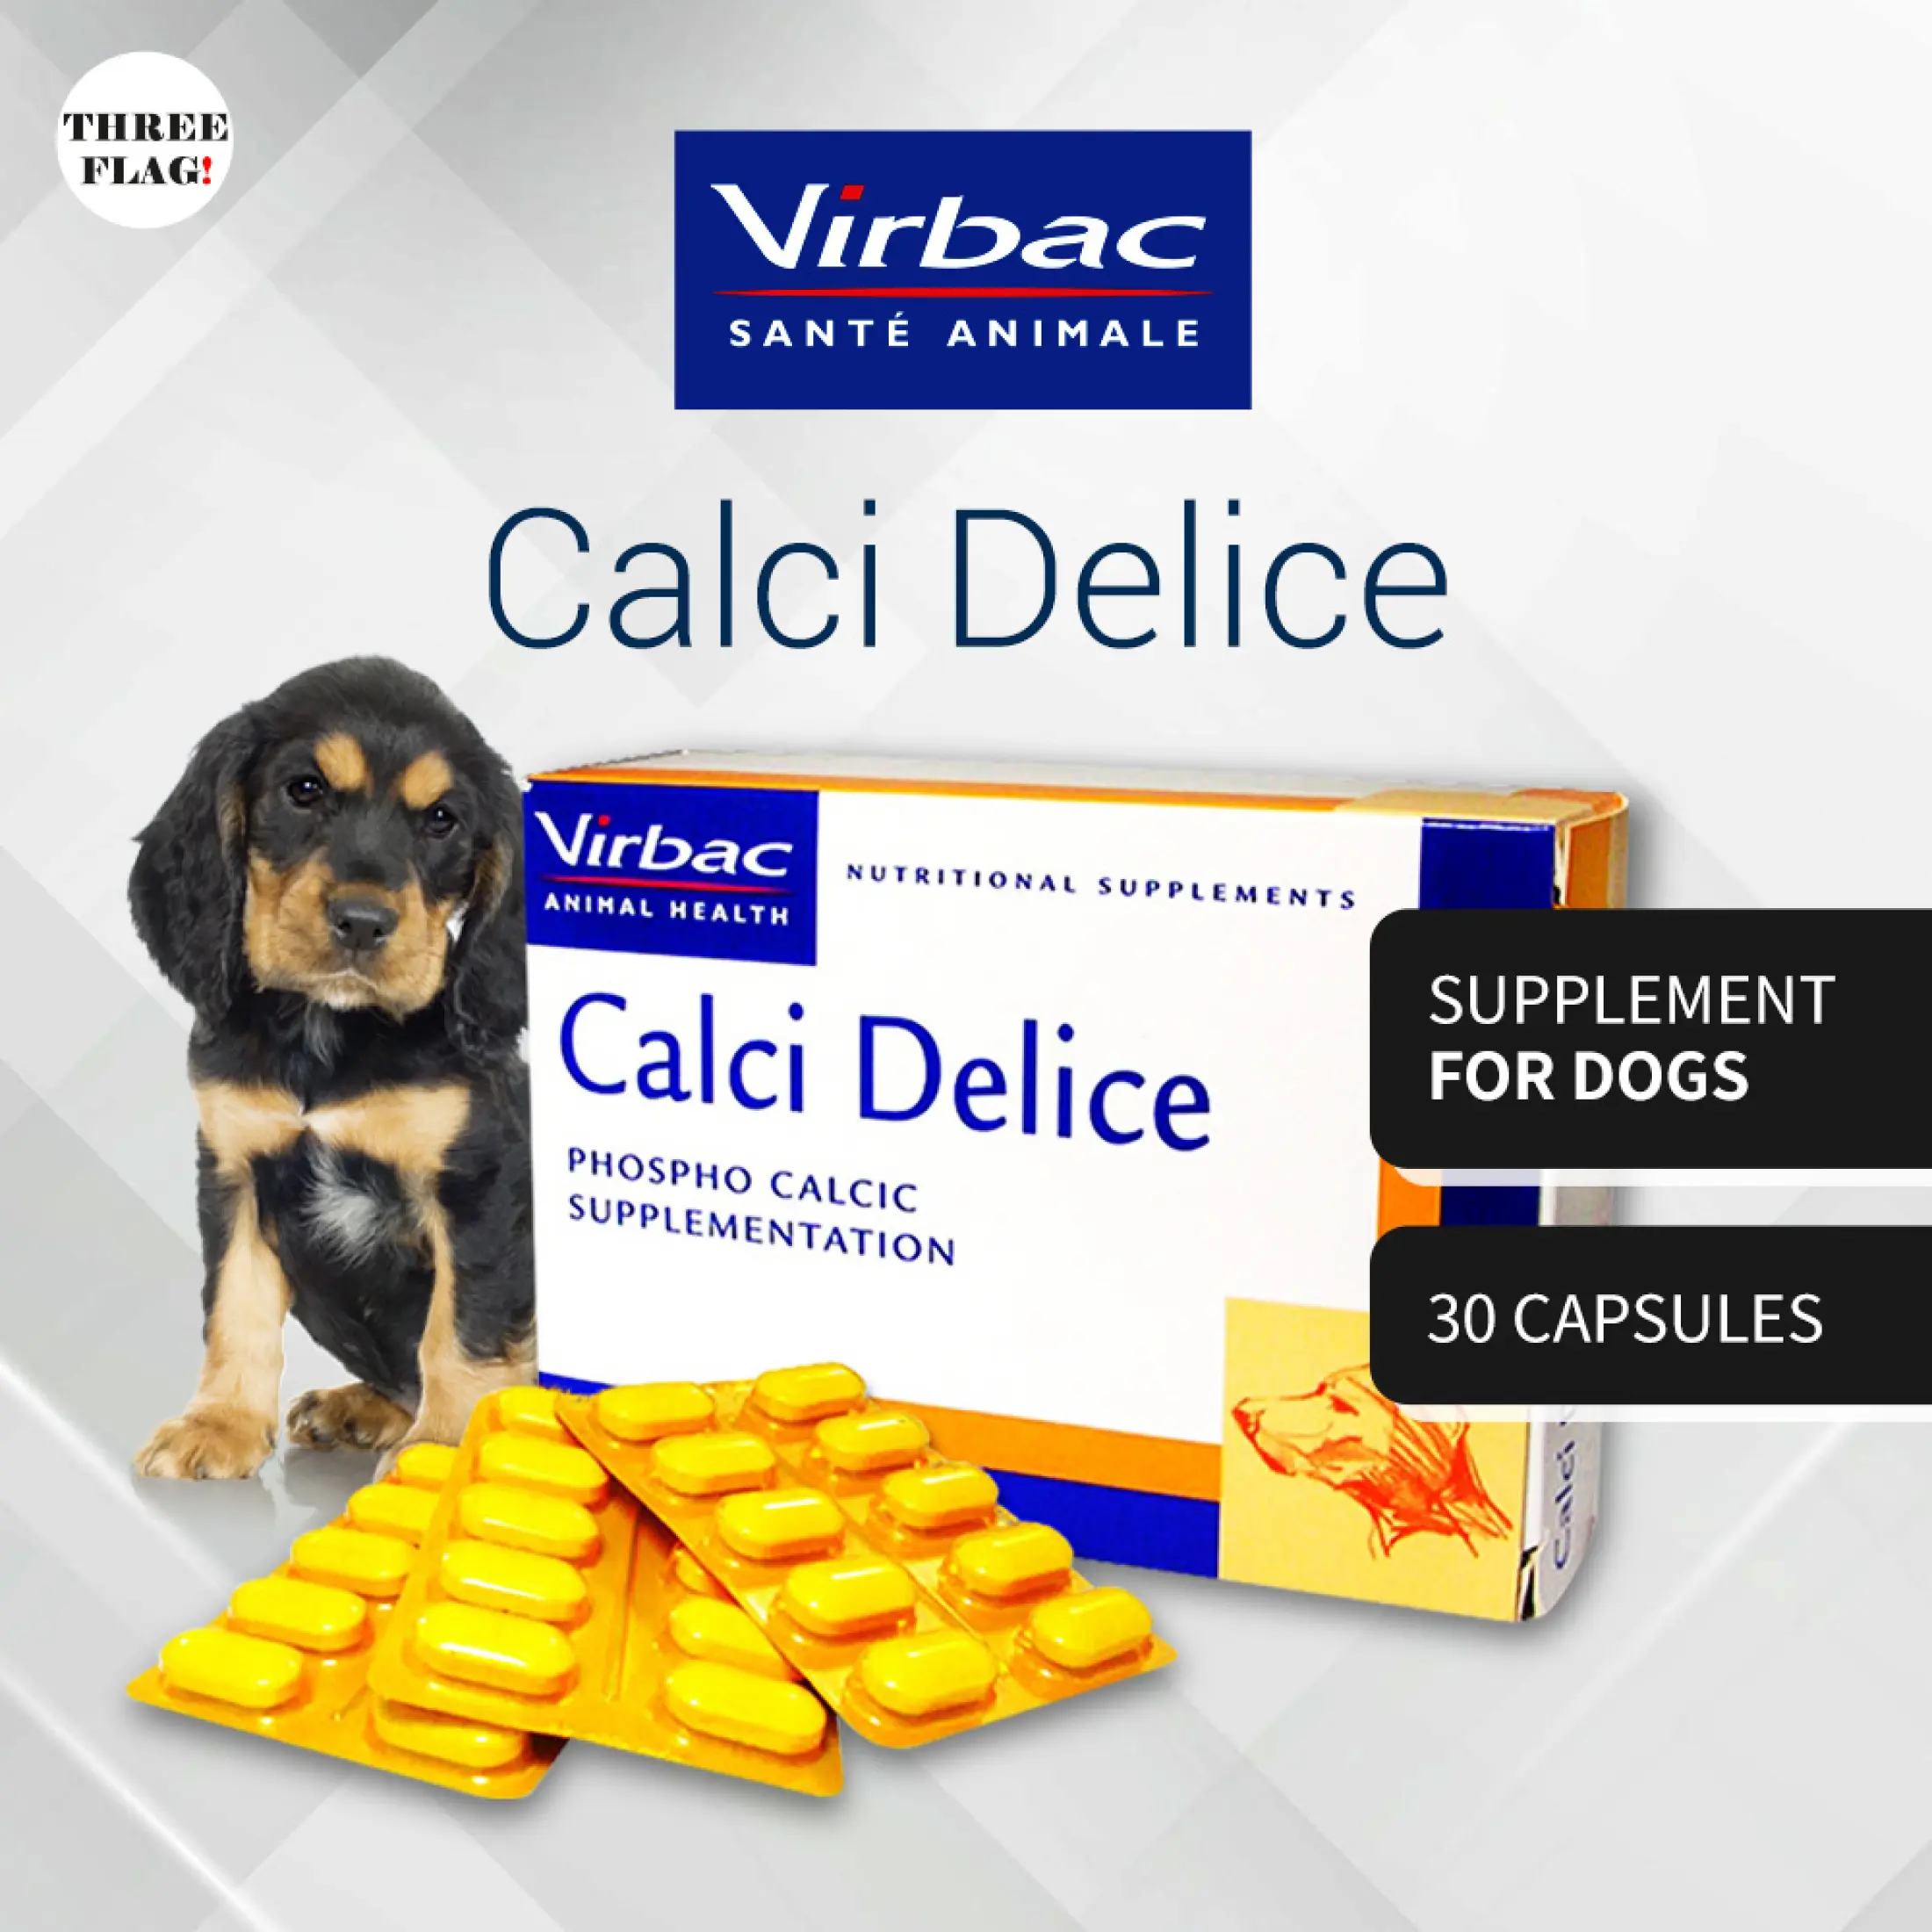 Virbac Calci Delice Health Supplement For Dogs 30 Capsules Lazada Singapore